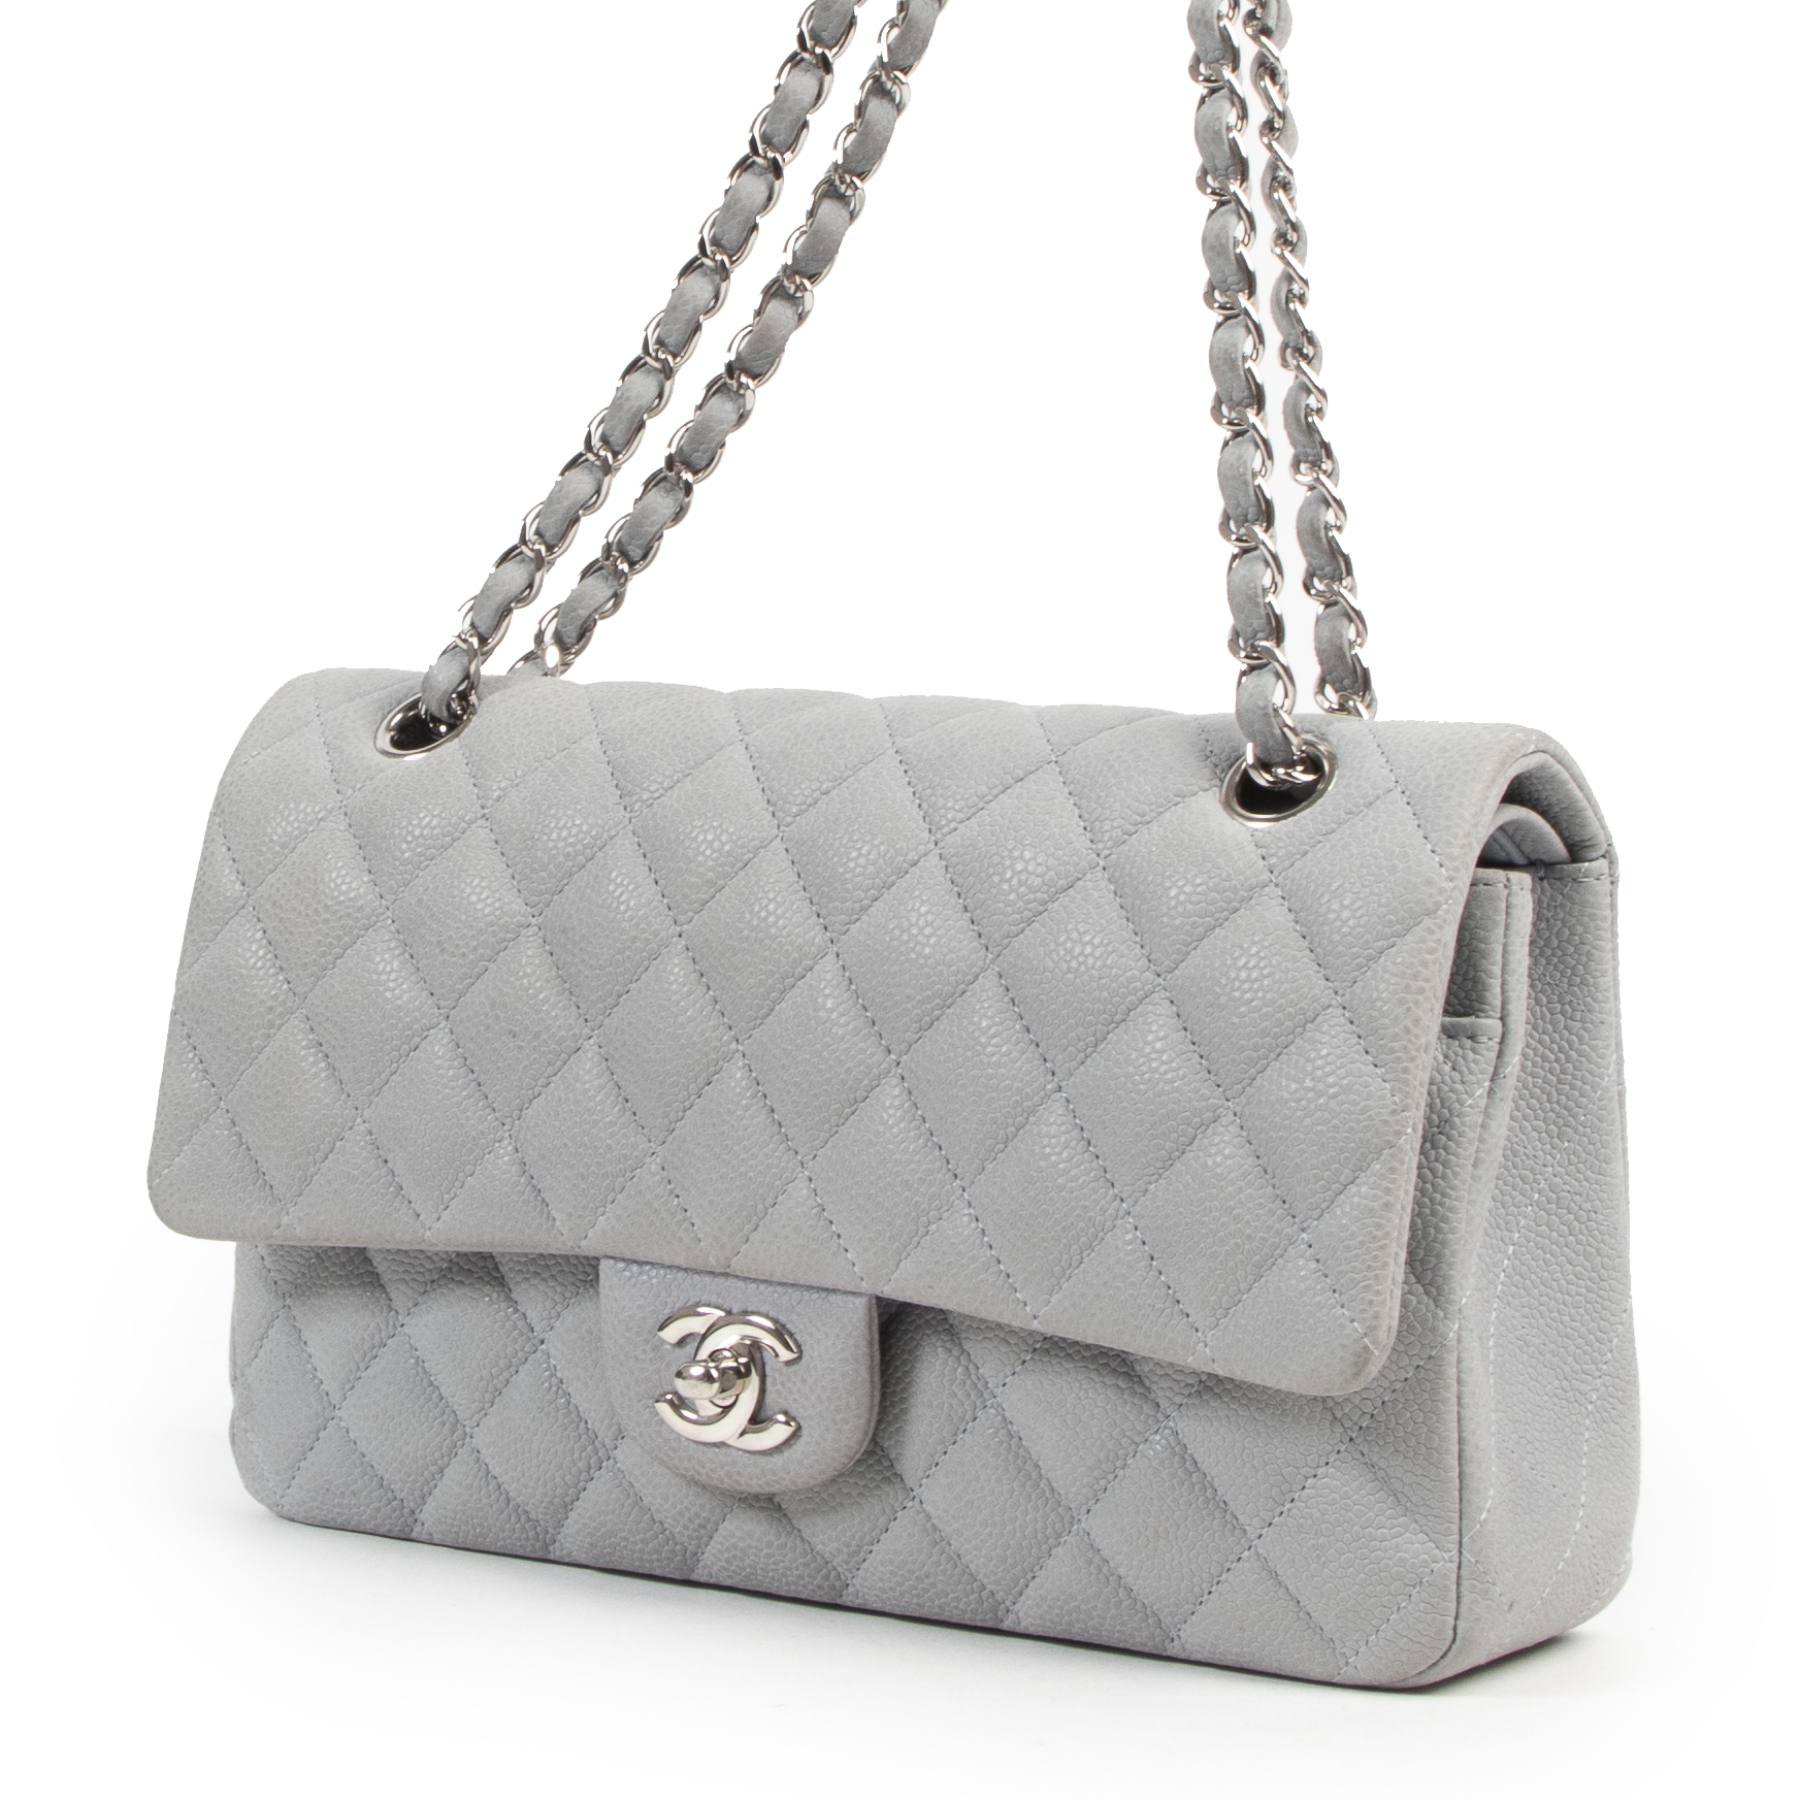 CHANEL Grey Quilted Lambskin Leather Medium Double Flap Bag  Silver  Hardware  Chelsea Vintage Couture